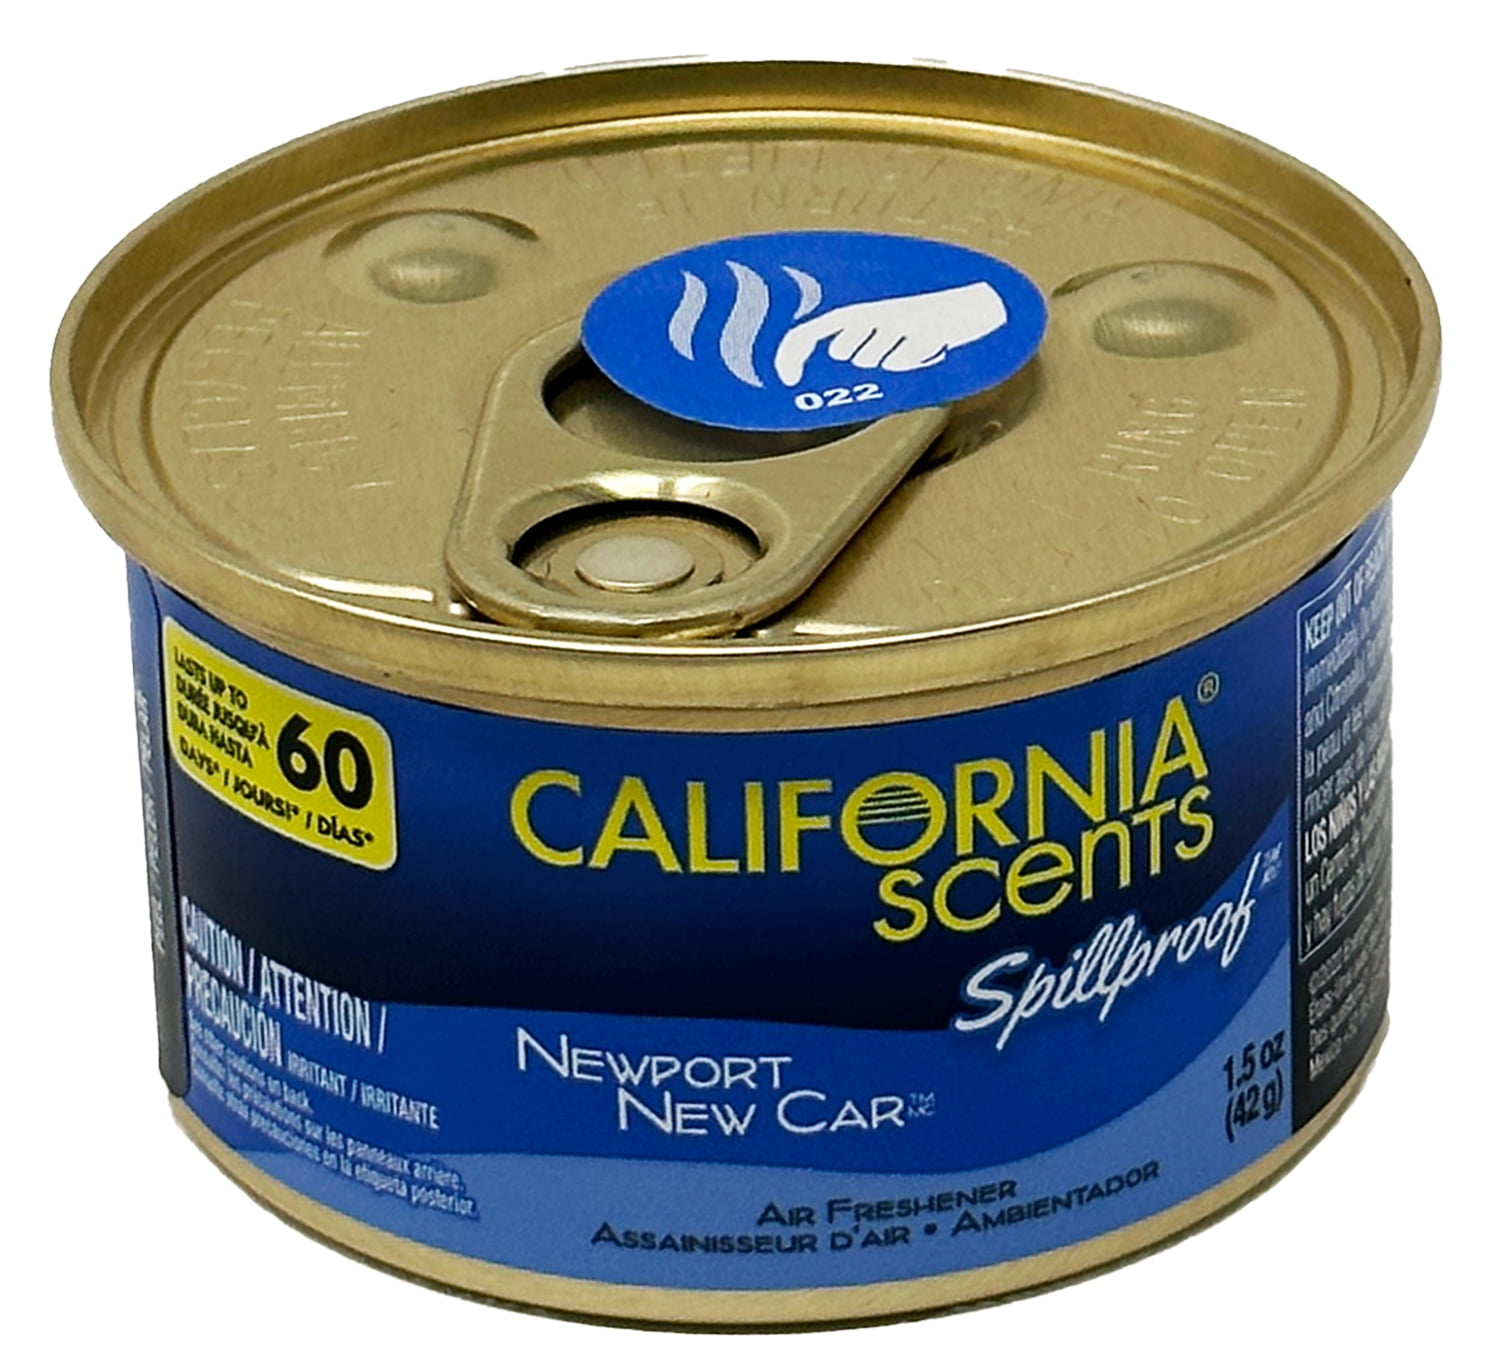 California Scents Car Fragrance Spillproof Can Organic Air Freshener Scent  New